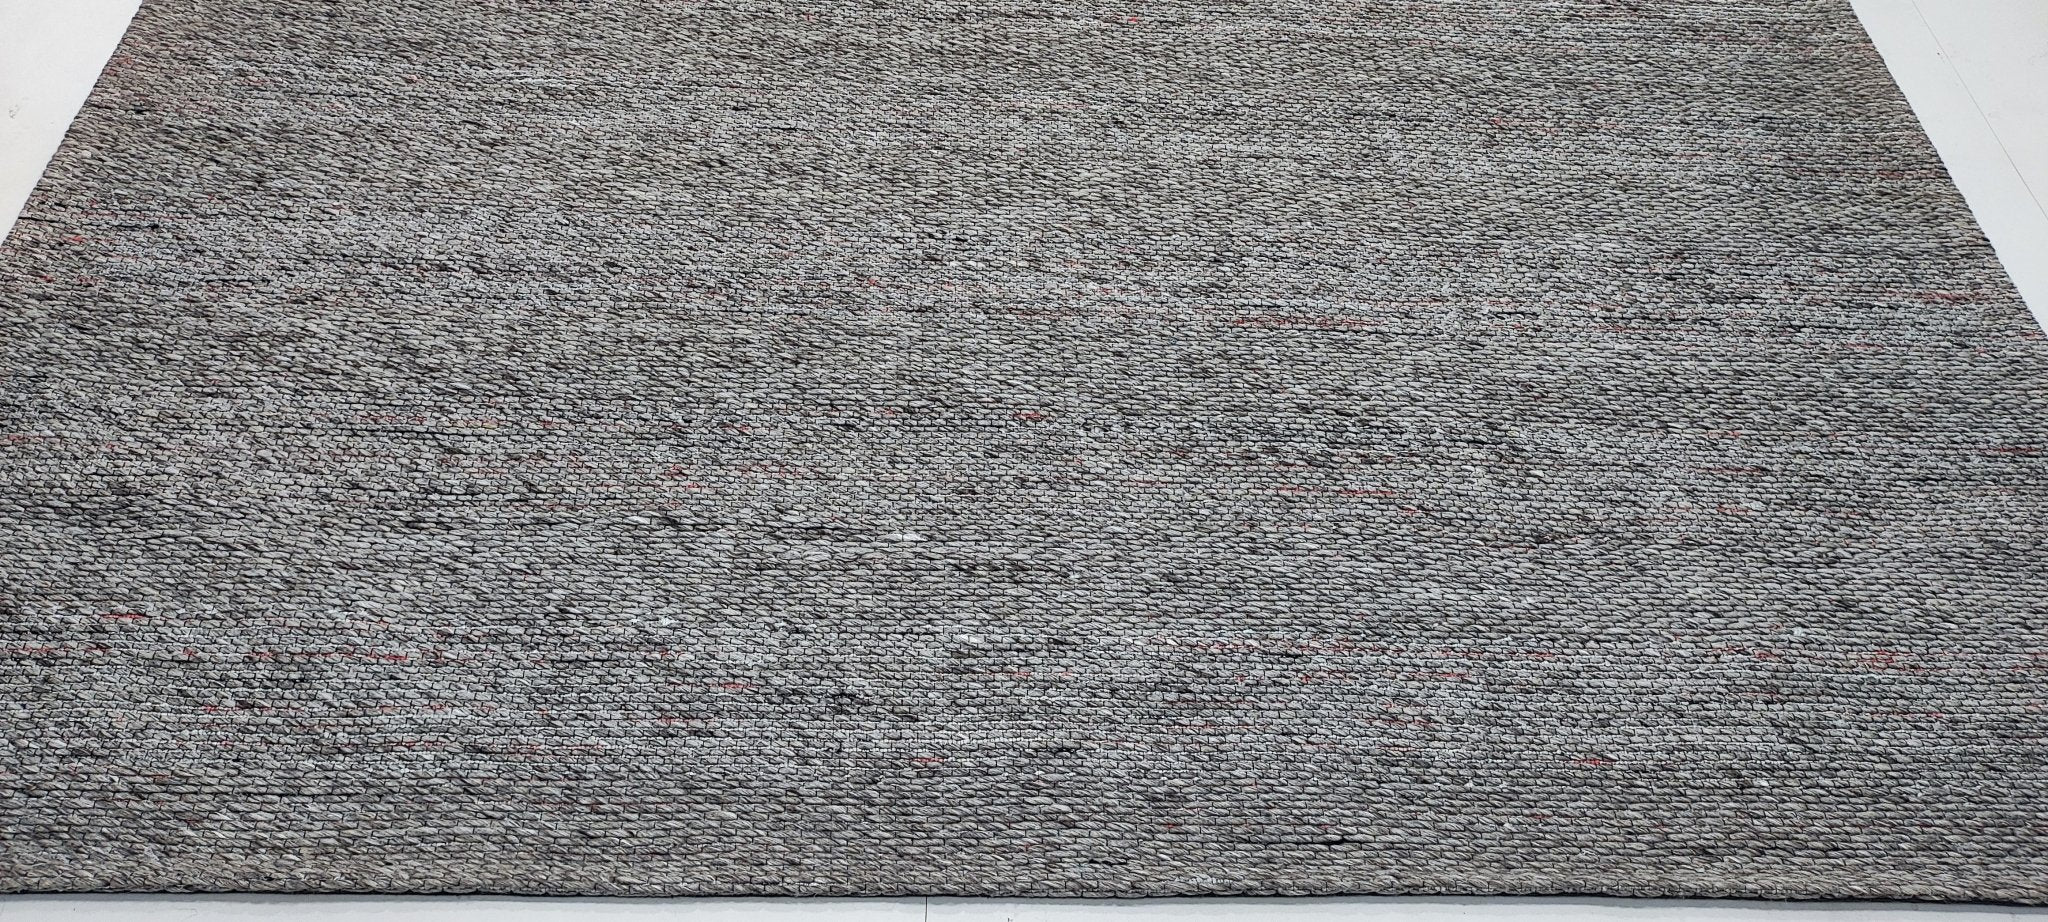 Jefferson 8x10.3 Handwoven Light Brown Jacquard Durrie | Banana Manor Rug Factory Outlet